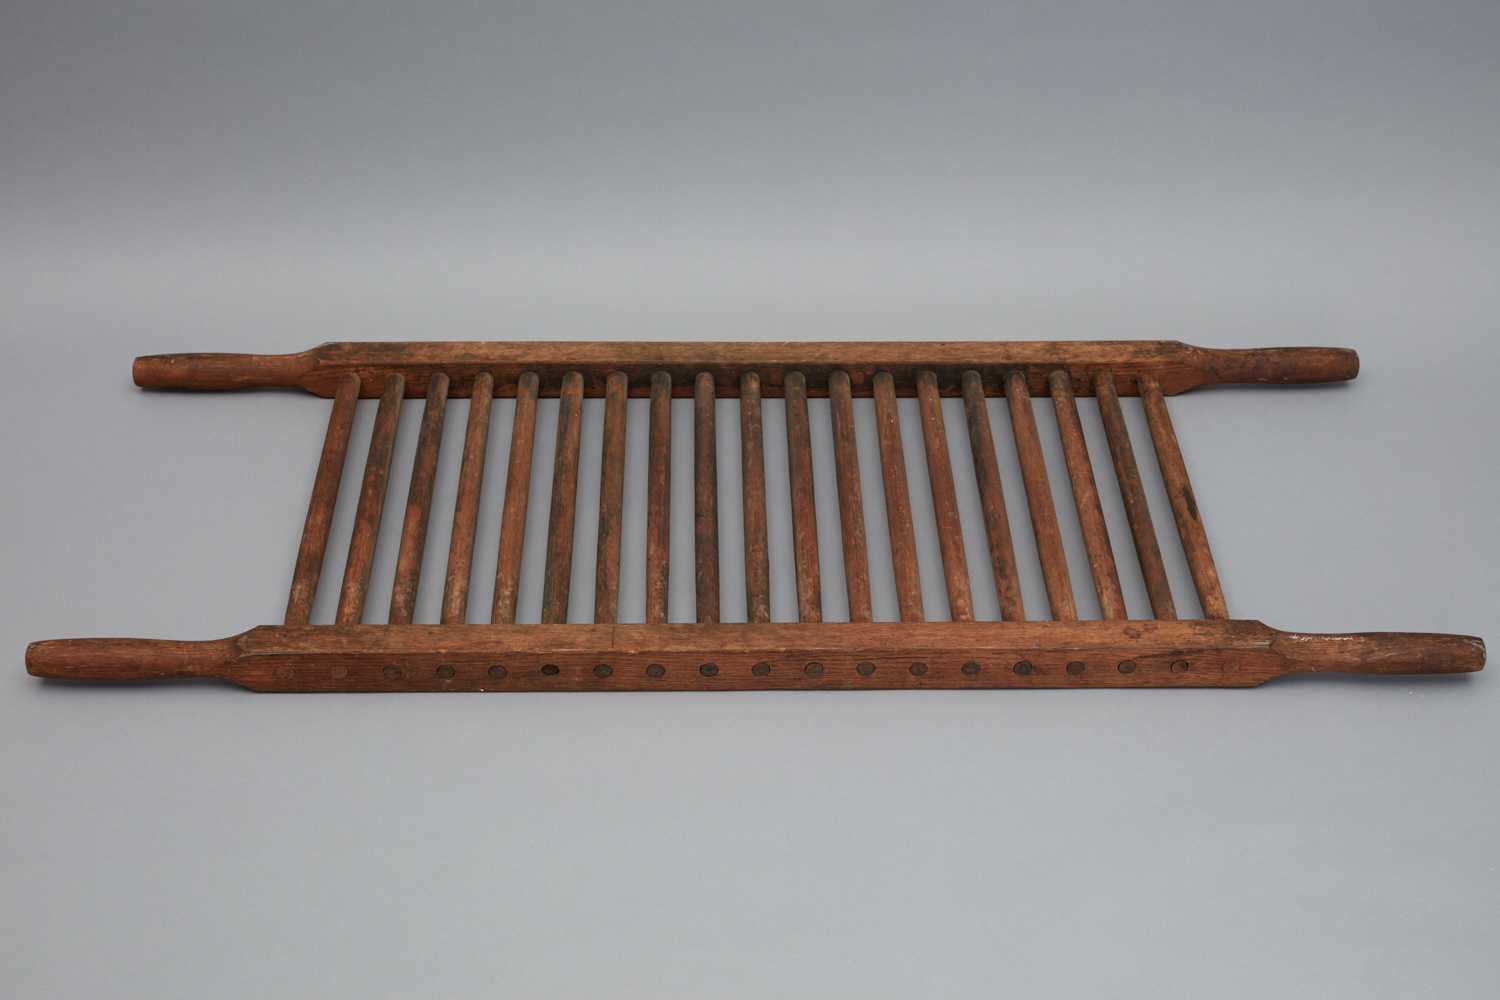 A wooden tray with a wooden handle.